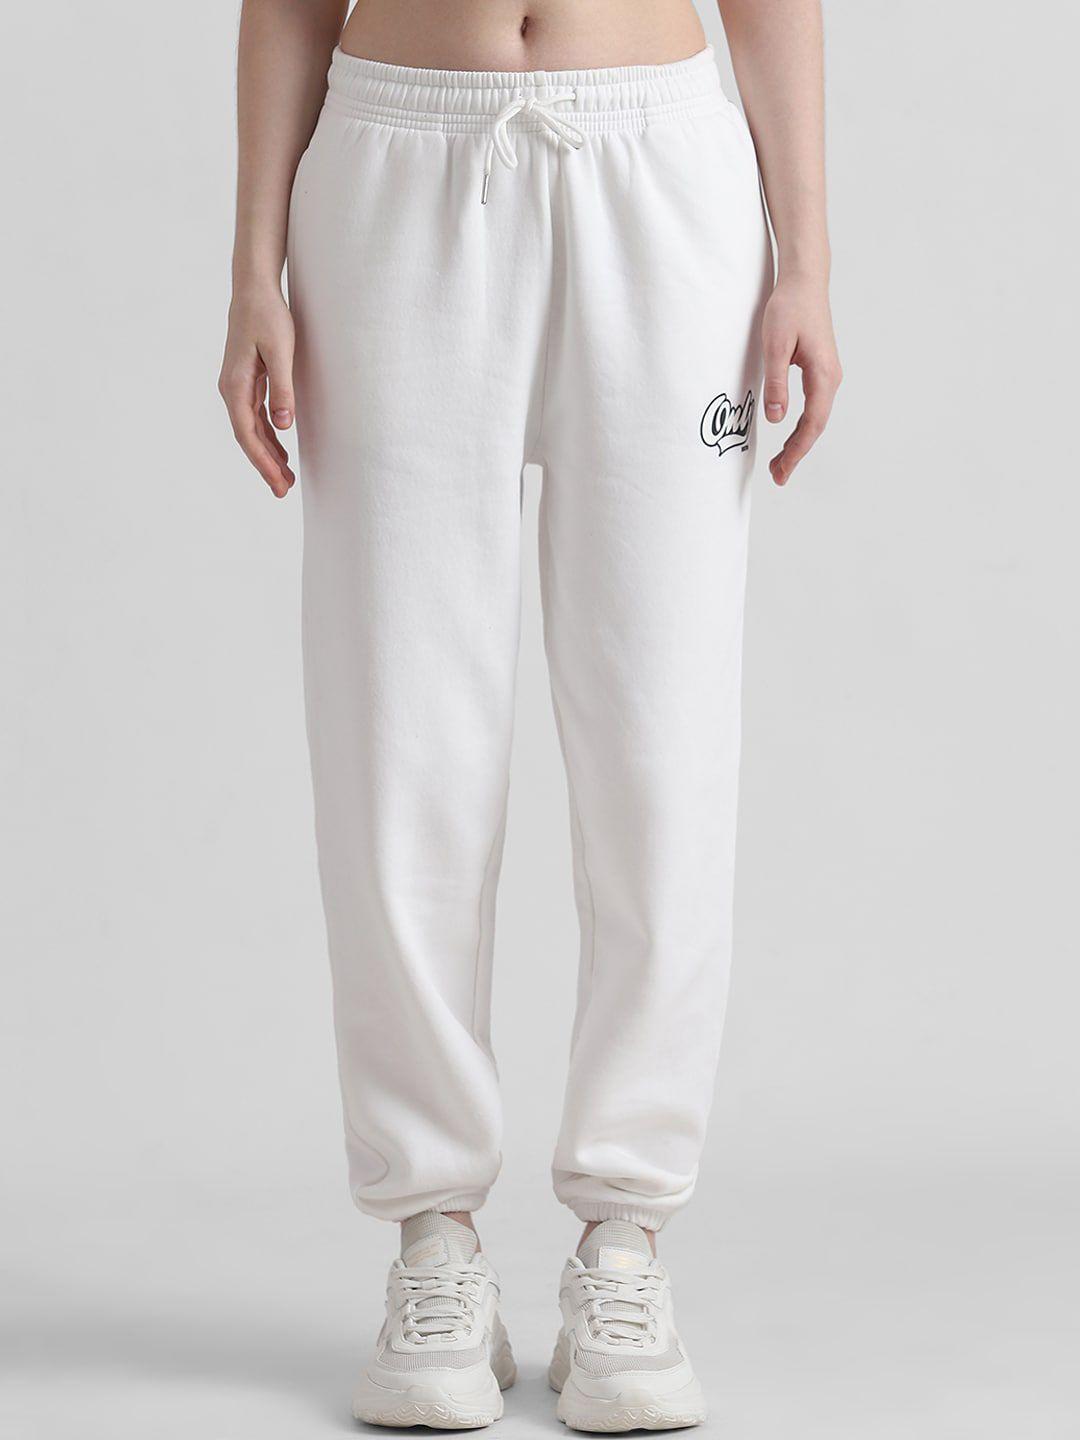 only women brand logo printed cotton relaxed fit joggers